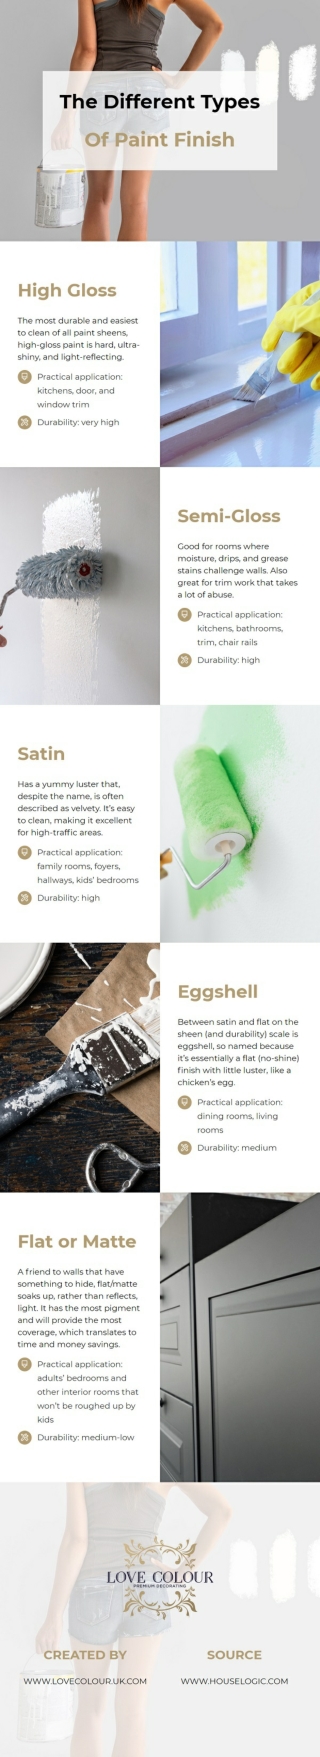 The Different Types of Paint Finish